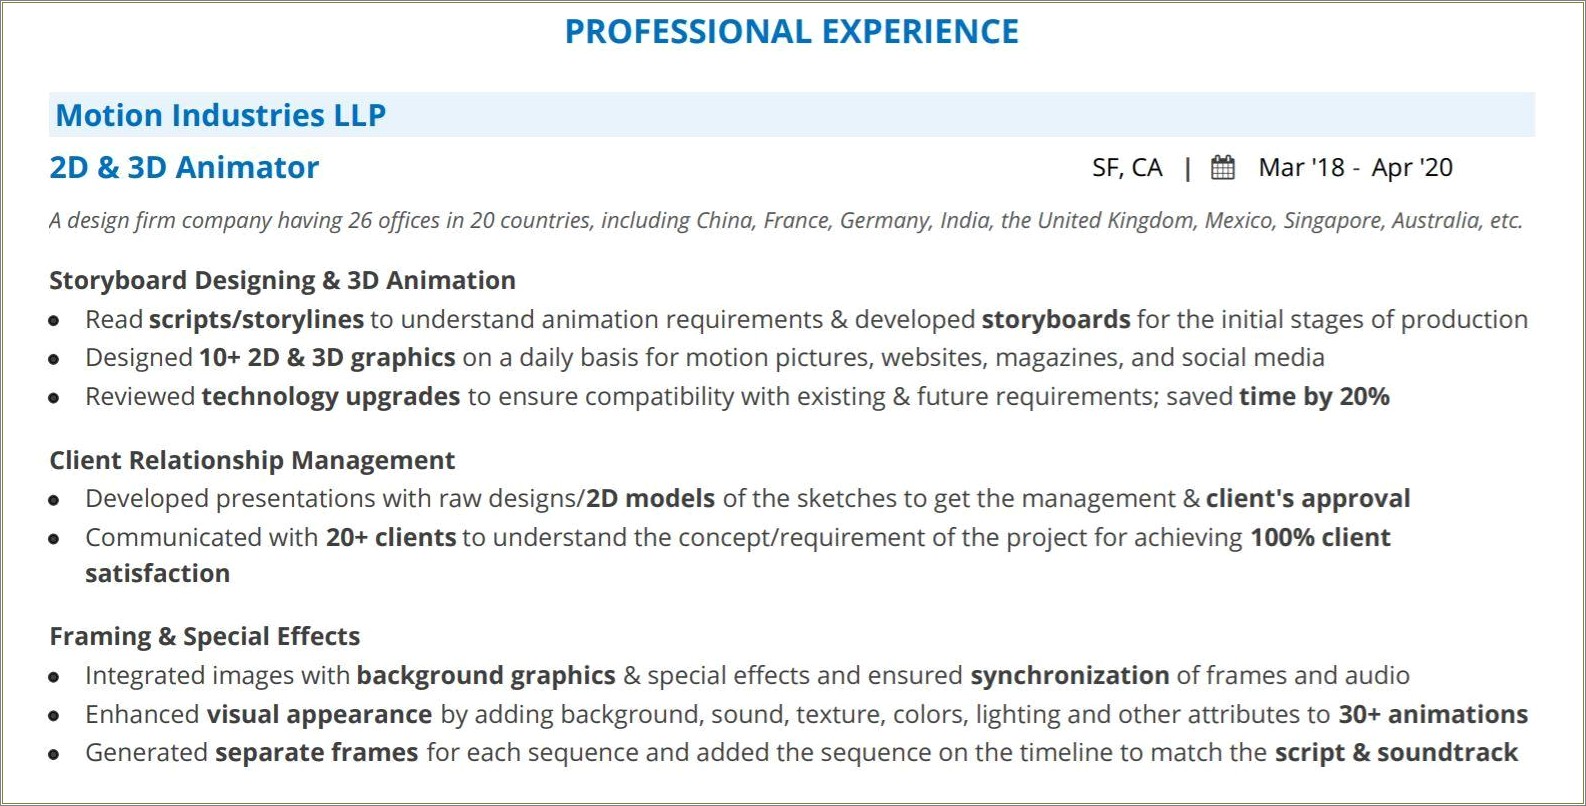 Sample Resumes 20+ Years Experience